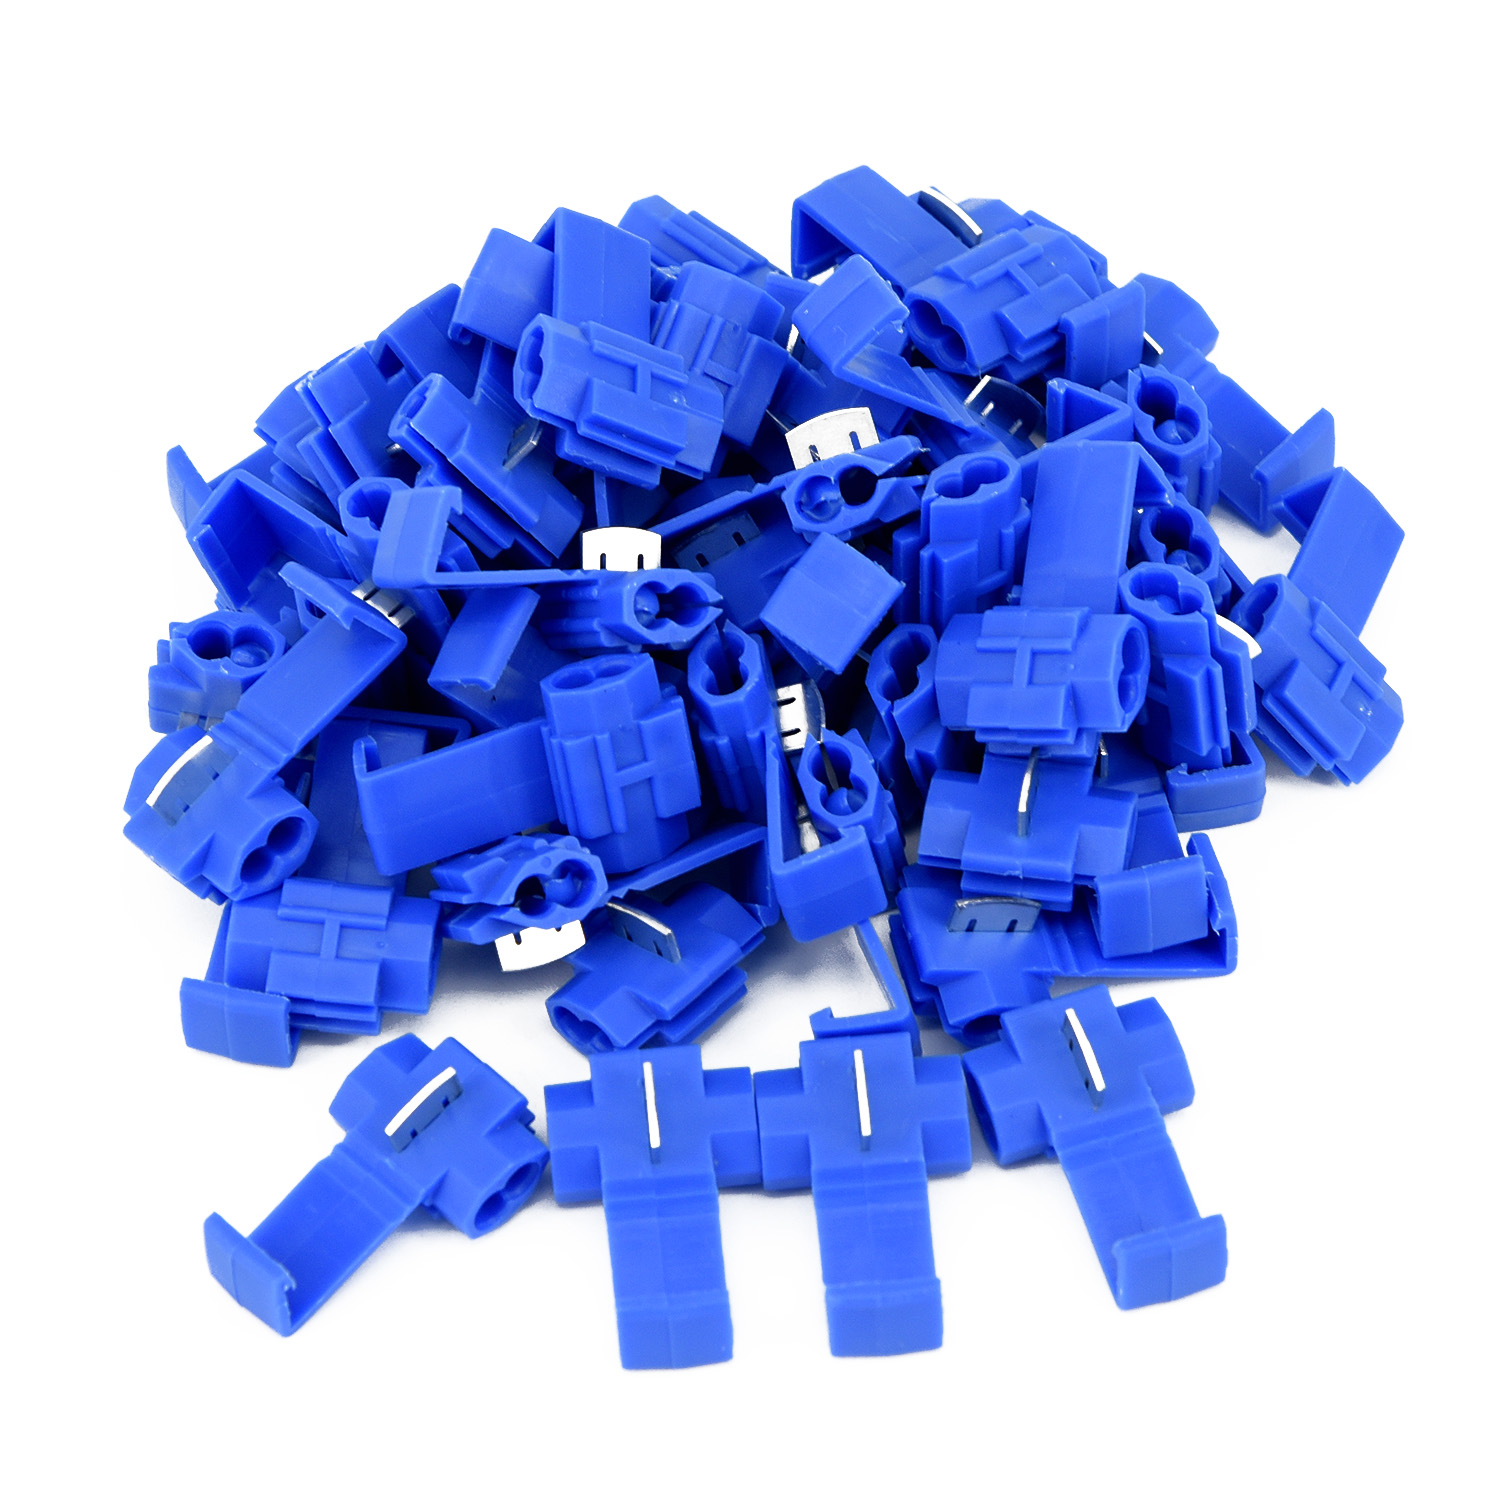 50pcs Blue Electrical Scotch Lock Wire Connectors Quick SElectrical Cable Connectors Snap Splice Lock Wire